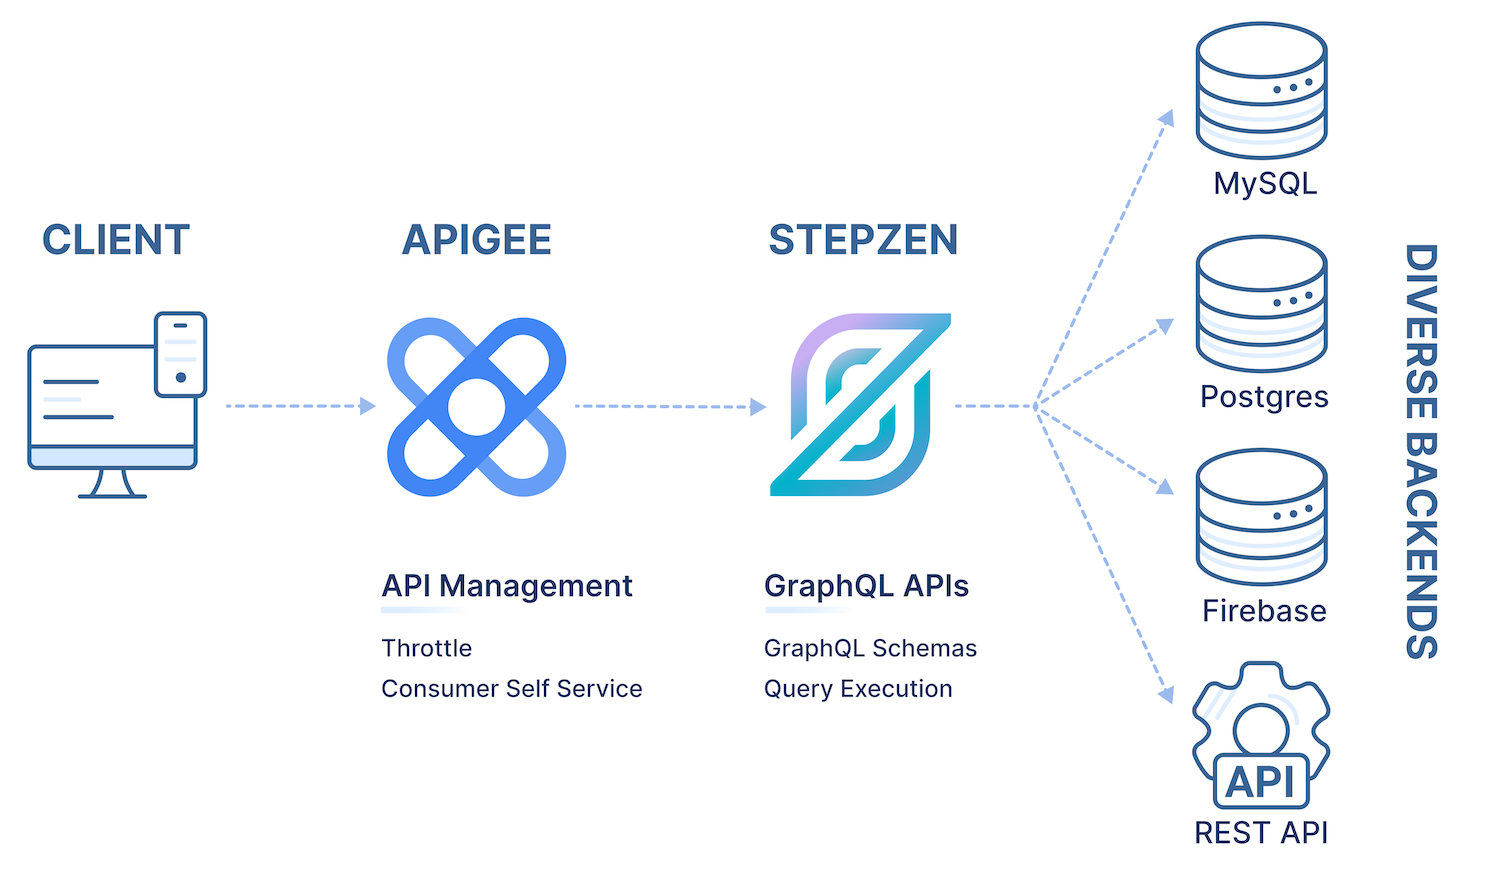 Apigee and StepZen Architecture